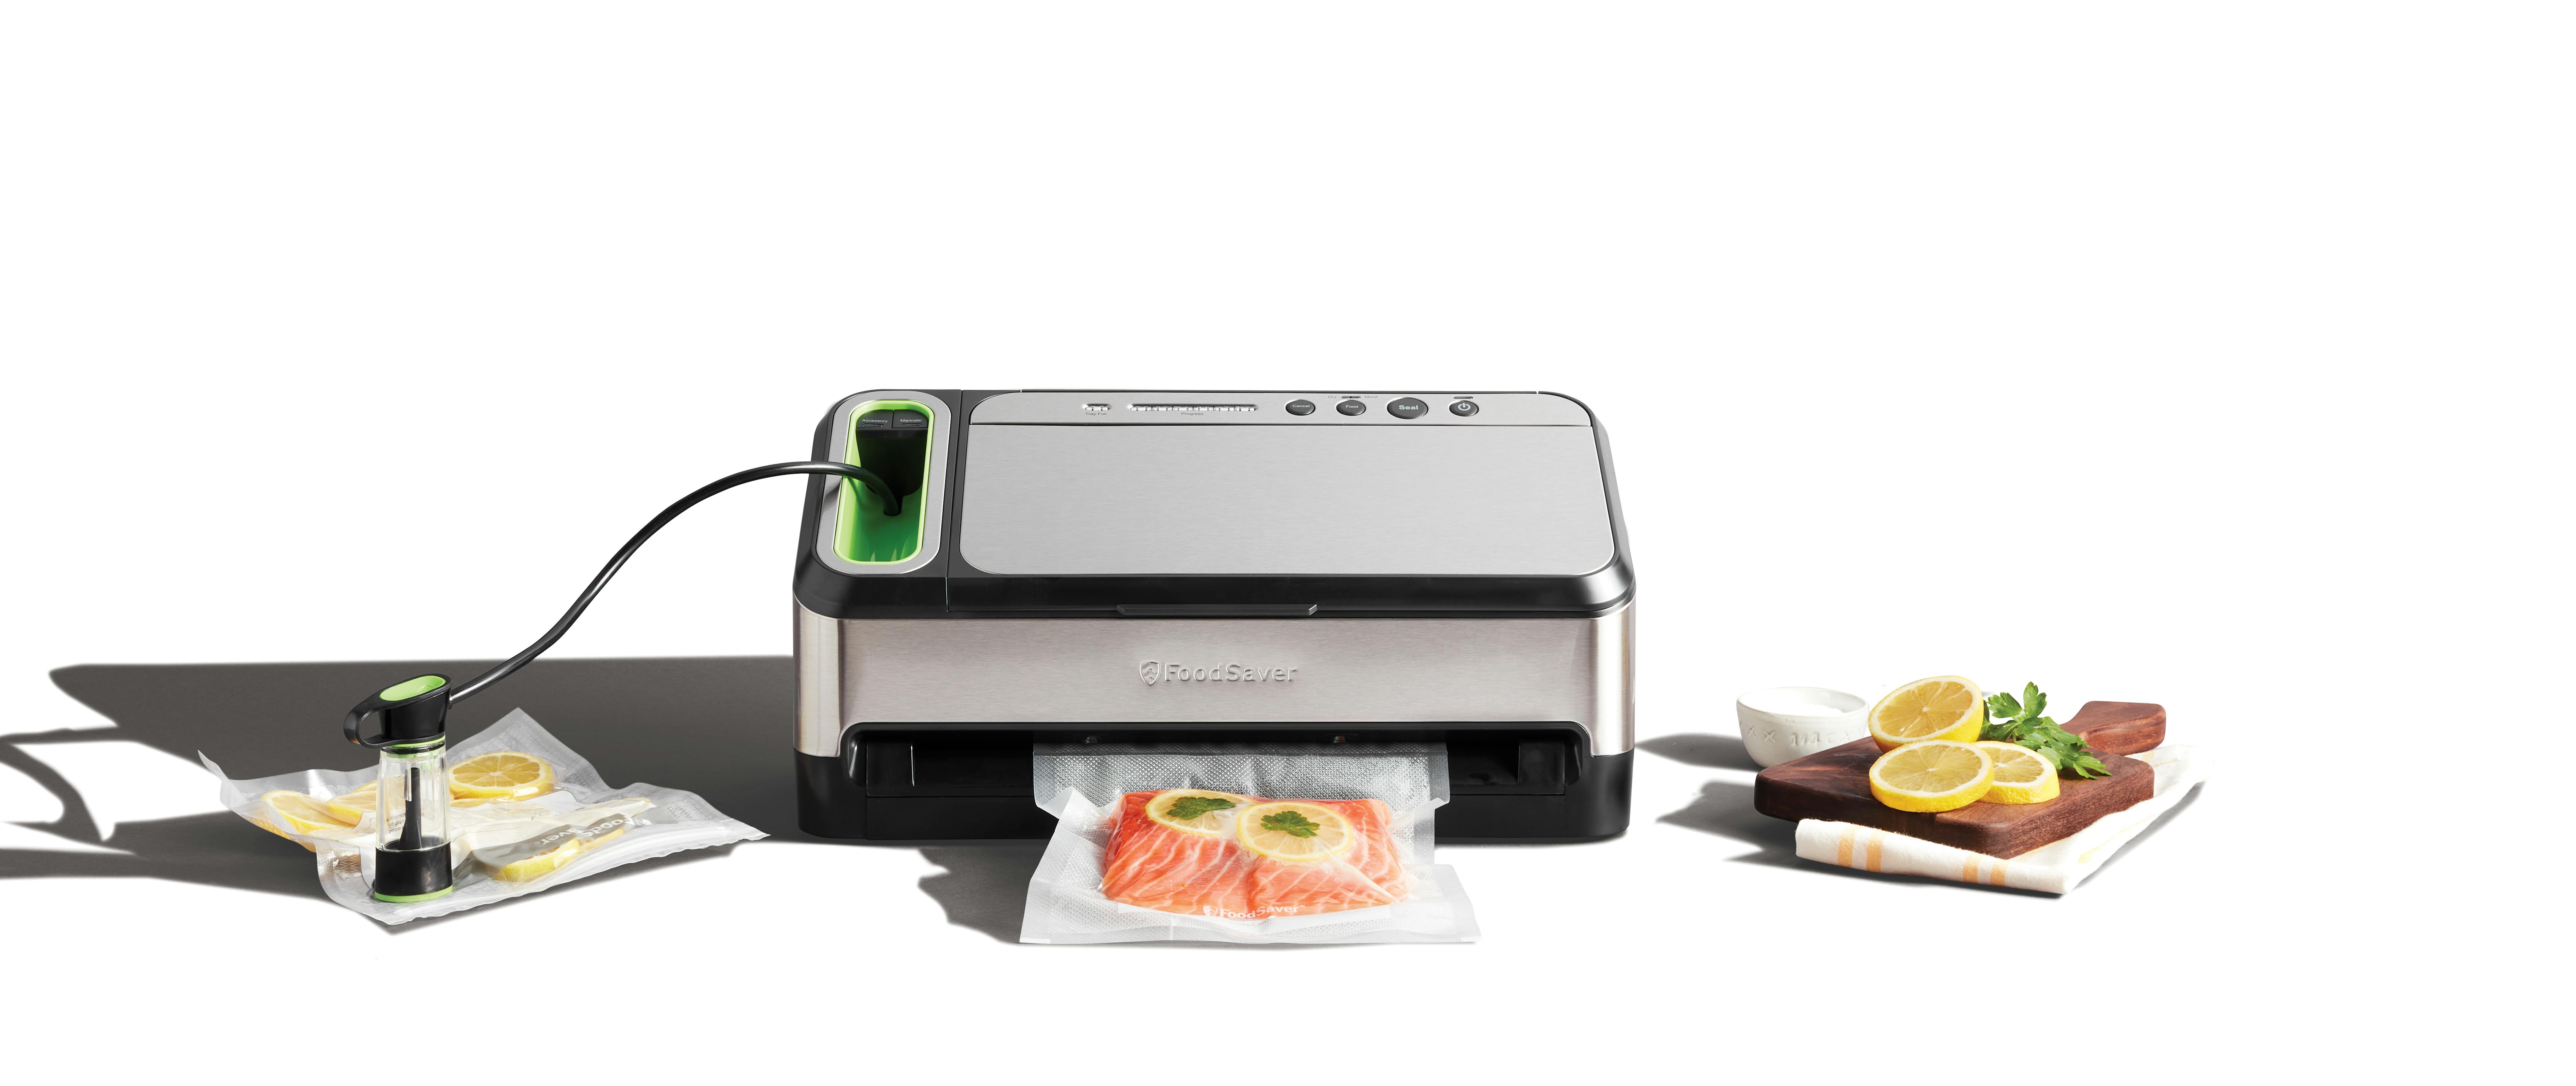 FoodSaver® 4800 Series 2-in-1 Automatic Vacuum Sealing System with 